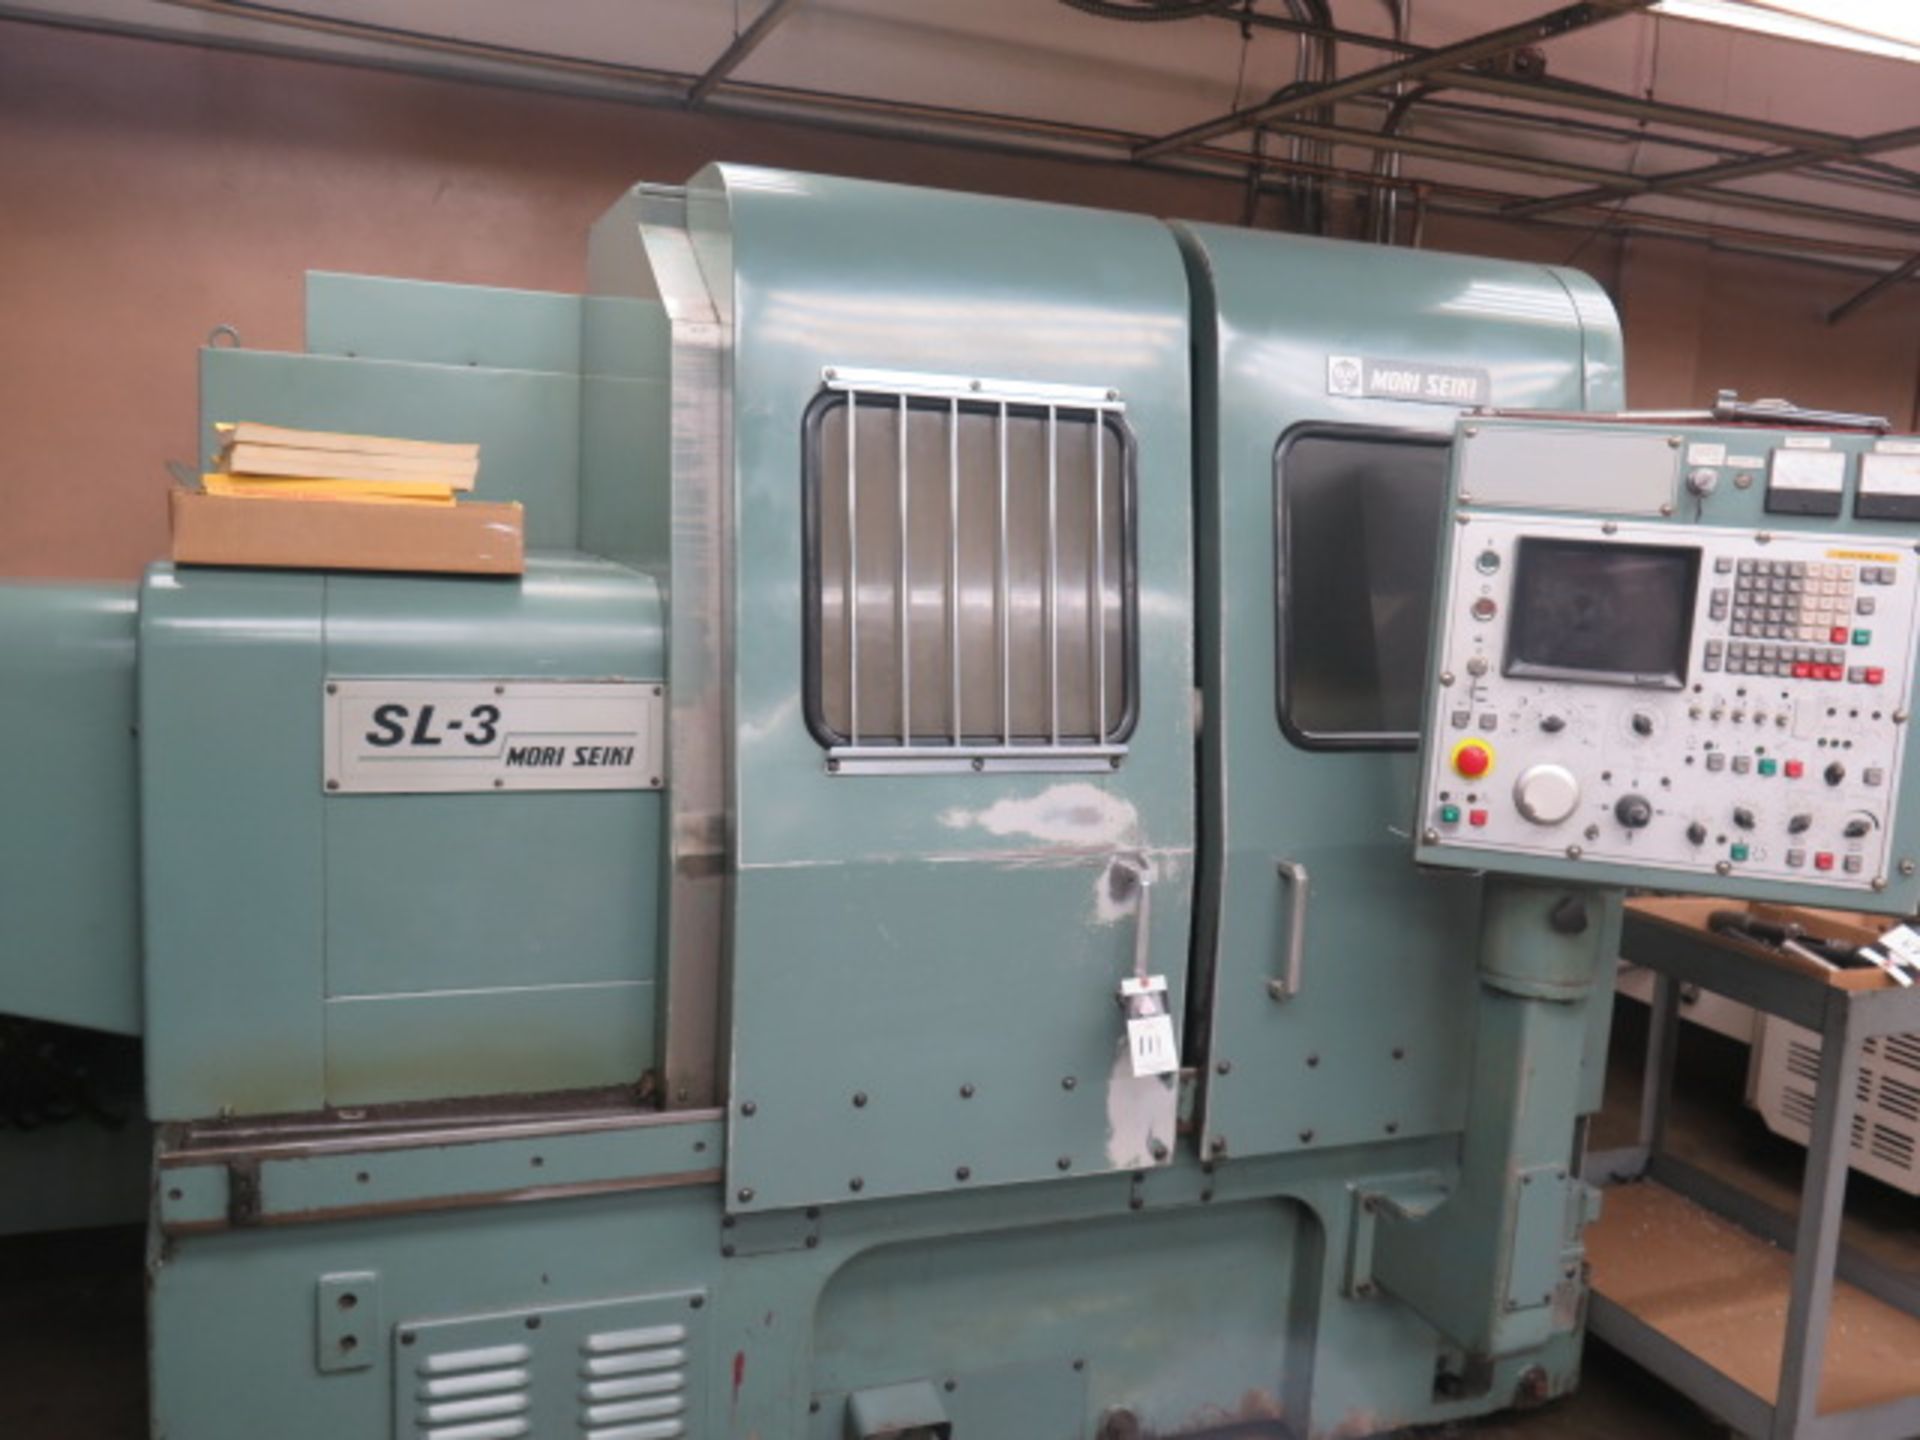 Mori Seiki SL-3A CNC Turning Center s/n 3141 w/ Fanuc 6T Controls, 12-Station Turret, SOLD AS IS - Image 3 of 15